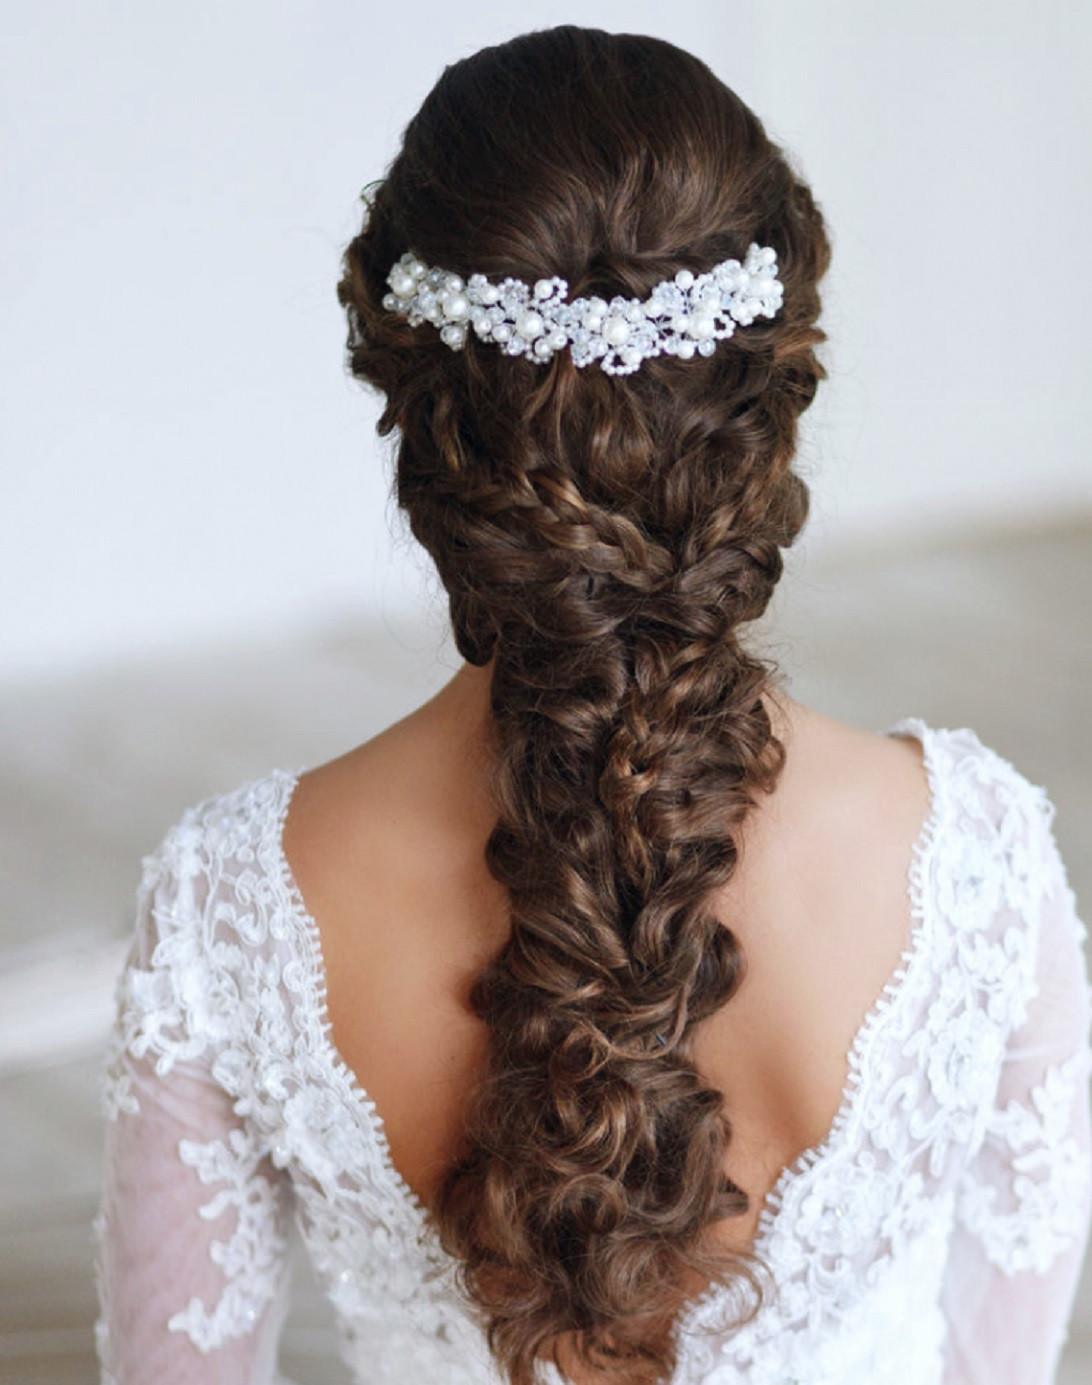 Plait Wedding Hairstyles
 6 Bridal Hairstyle Tips for Your Big day